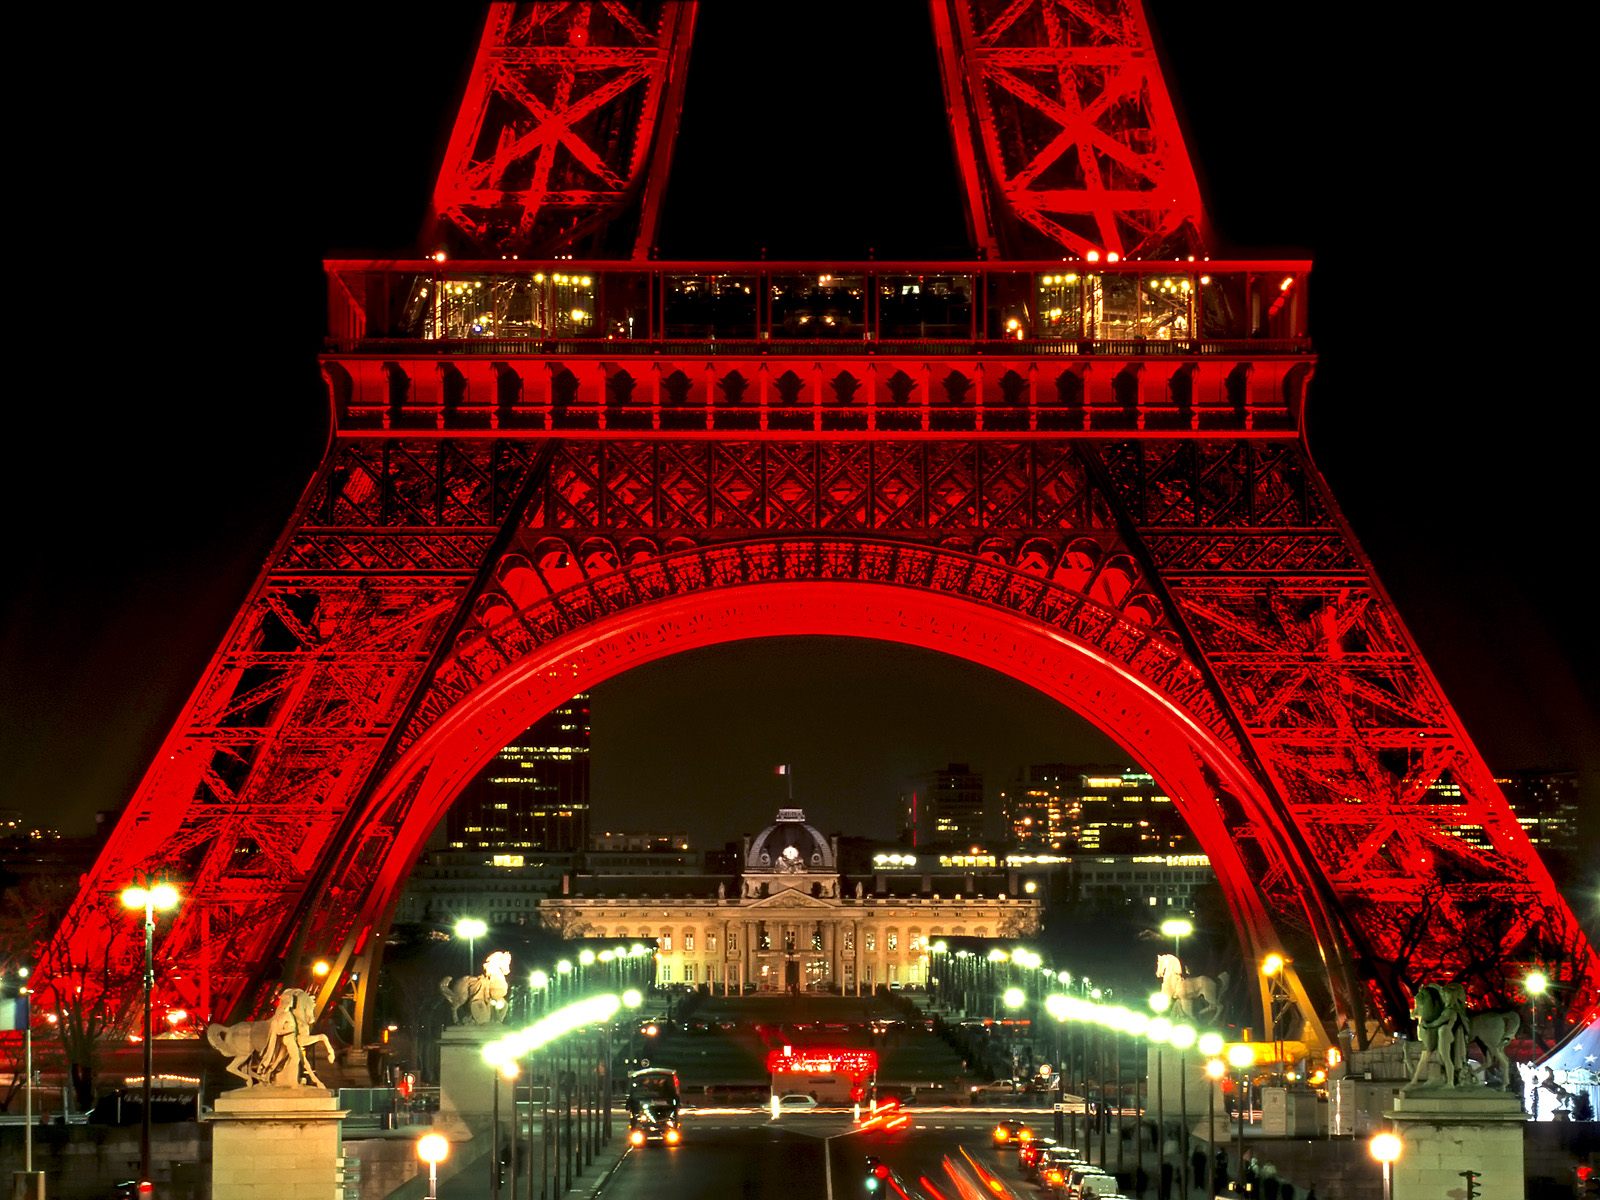 [Eiffel+Tower+at+Night+During+Chinese+New+Year+Festivity,+Paris,+France.jpg]